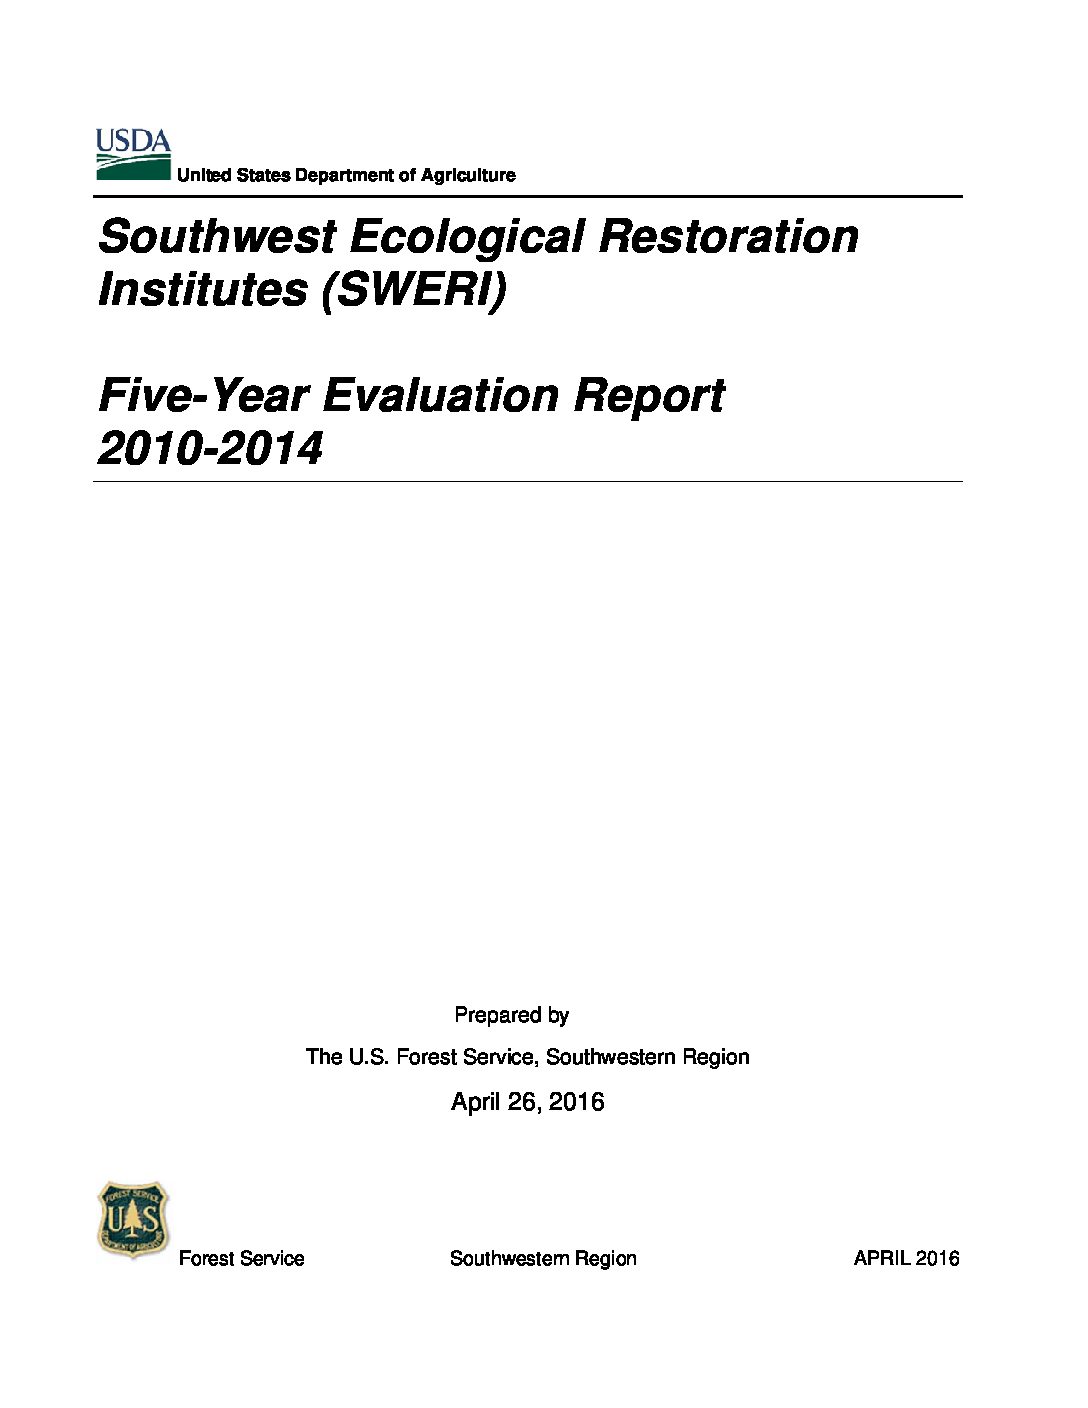 Southwest Ecological Restoration Institutes Evaluation Report for the years 2010-2014